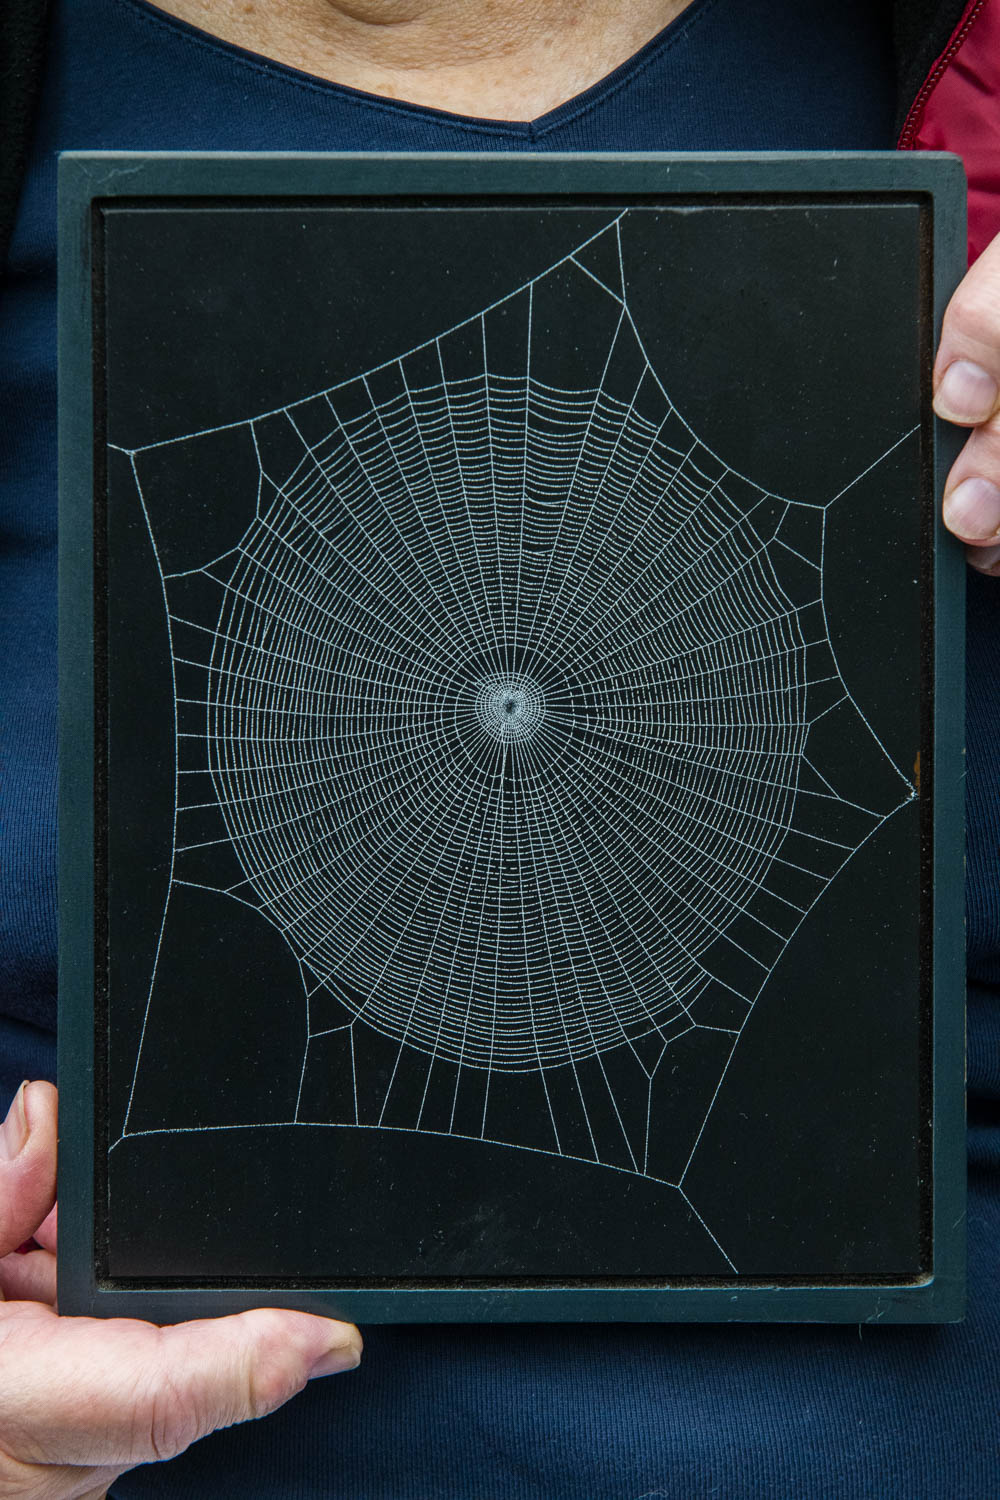 Spider Web art from the Spider Web Museum in Williamstown, VT, taken by Accidentally Wes Anderson